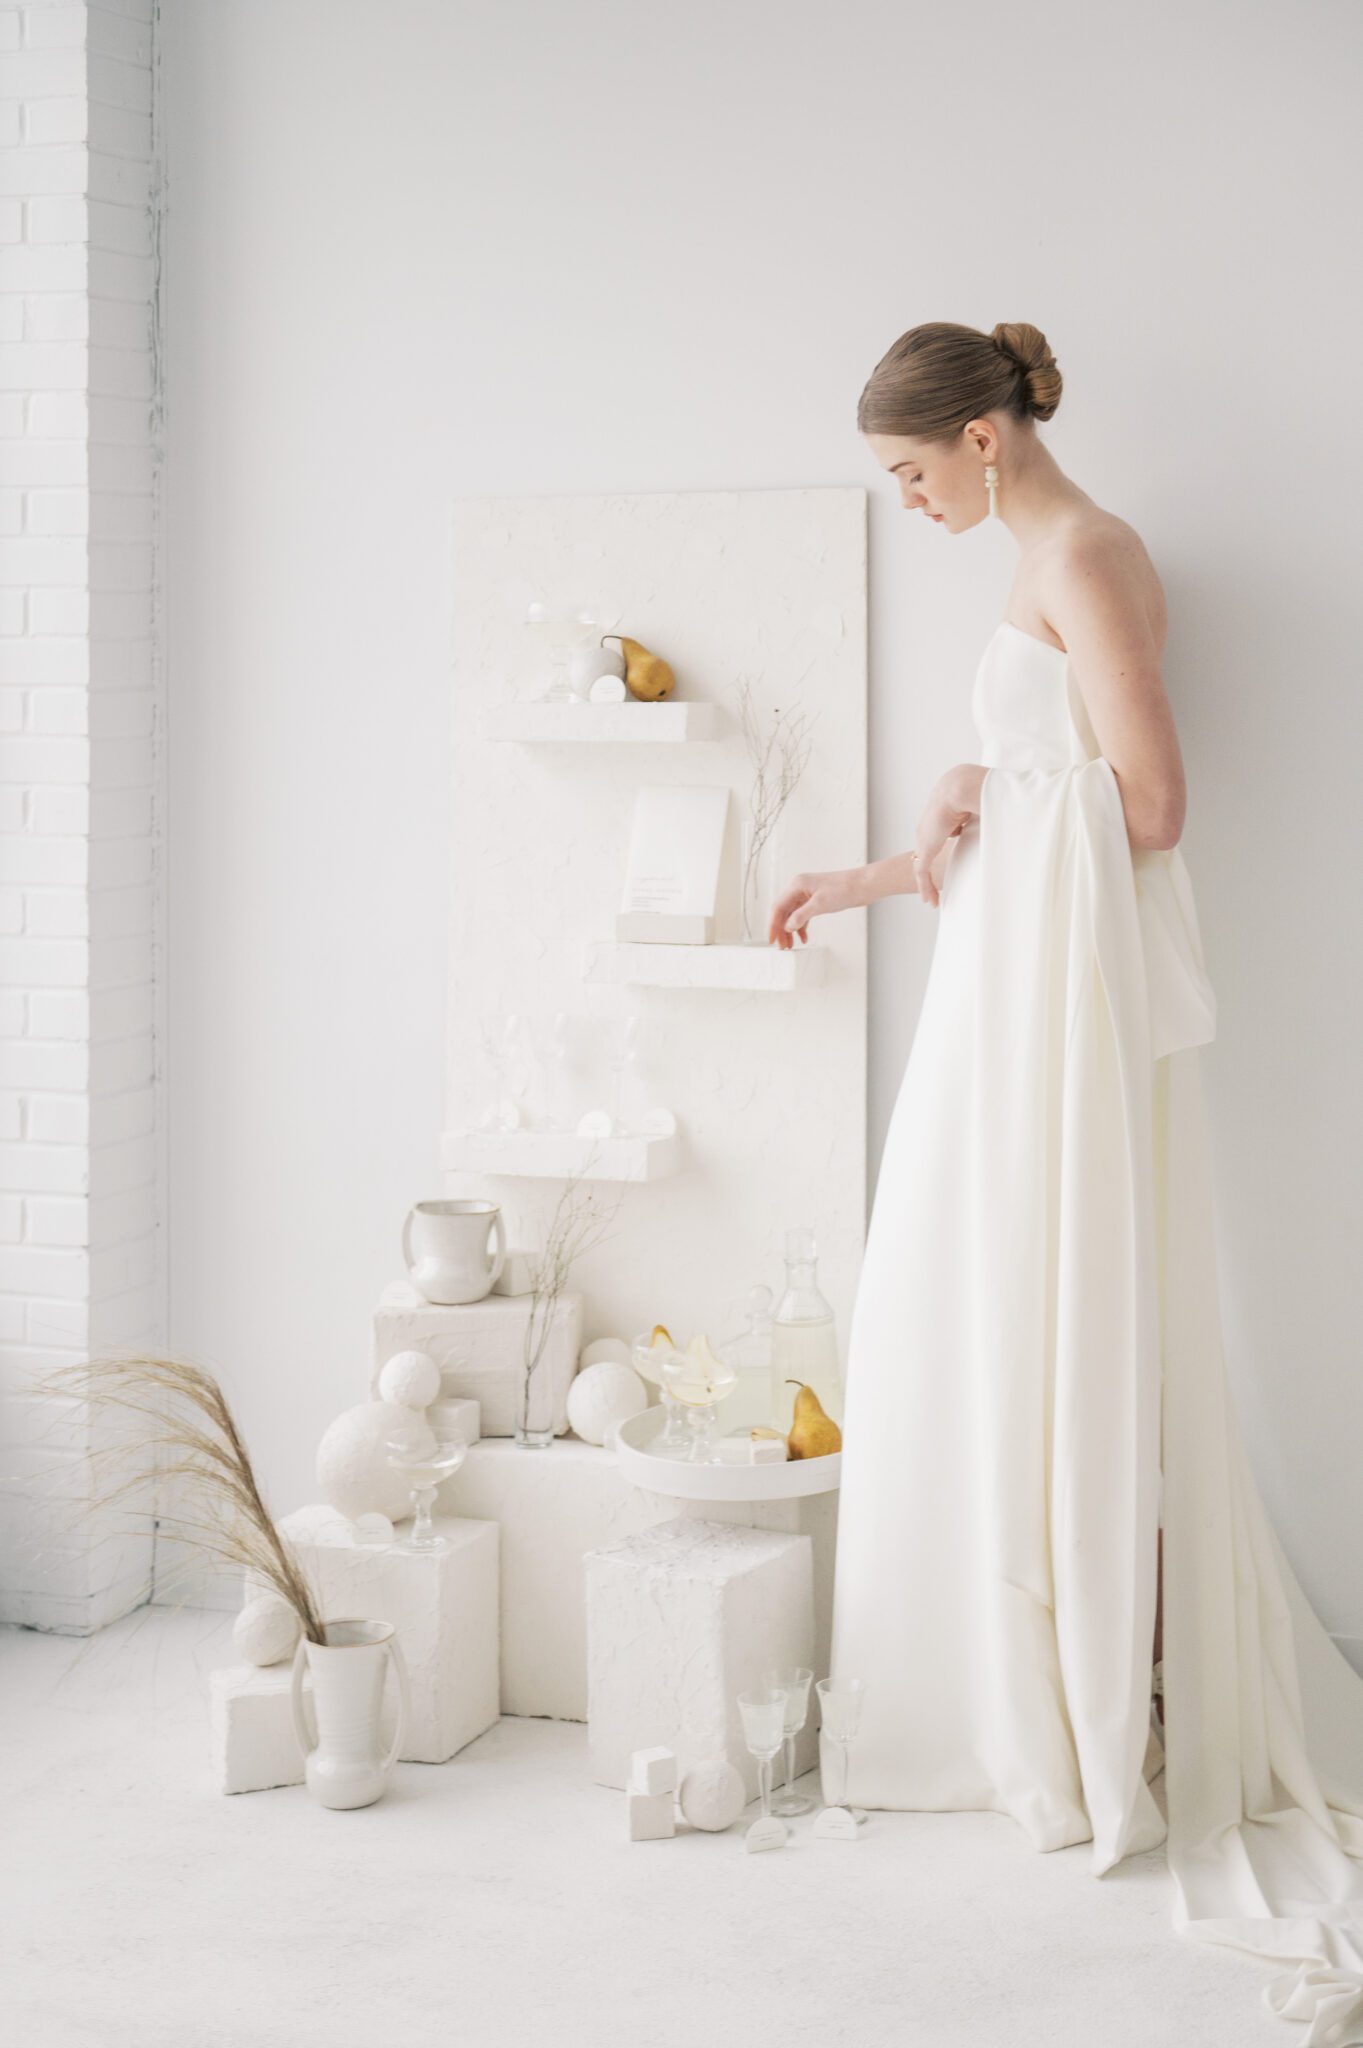 Grecian style wedding gown by Aesling: a fashionable choice for modern brides, Avant-garde wedding style with innovative floral arrangements on plaster shelf